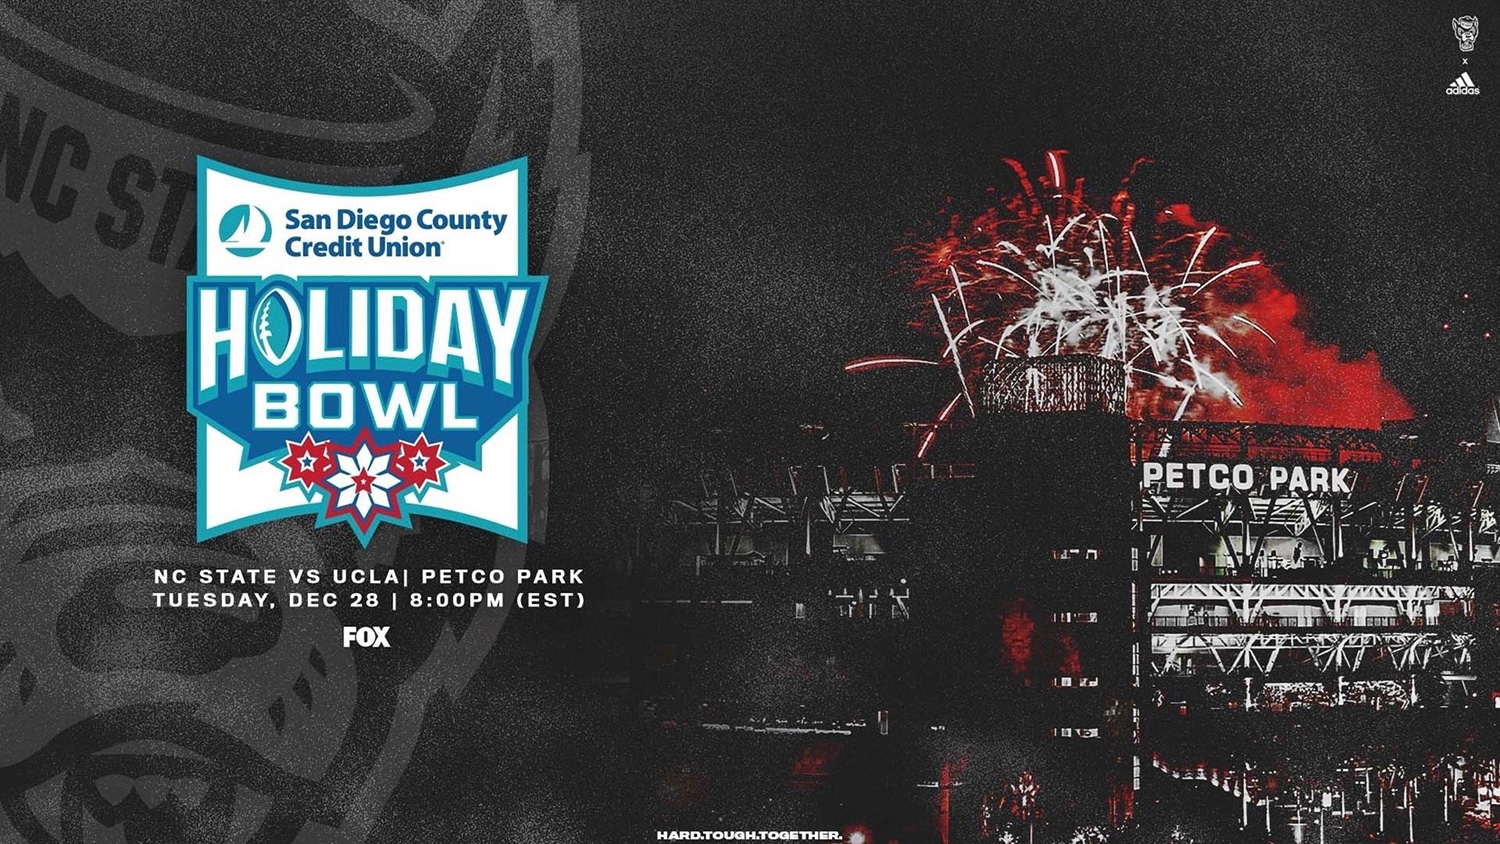 Image of Petcom Stadium with fireworks and logo for Holiday Bowl.